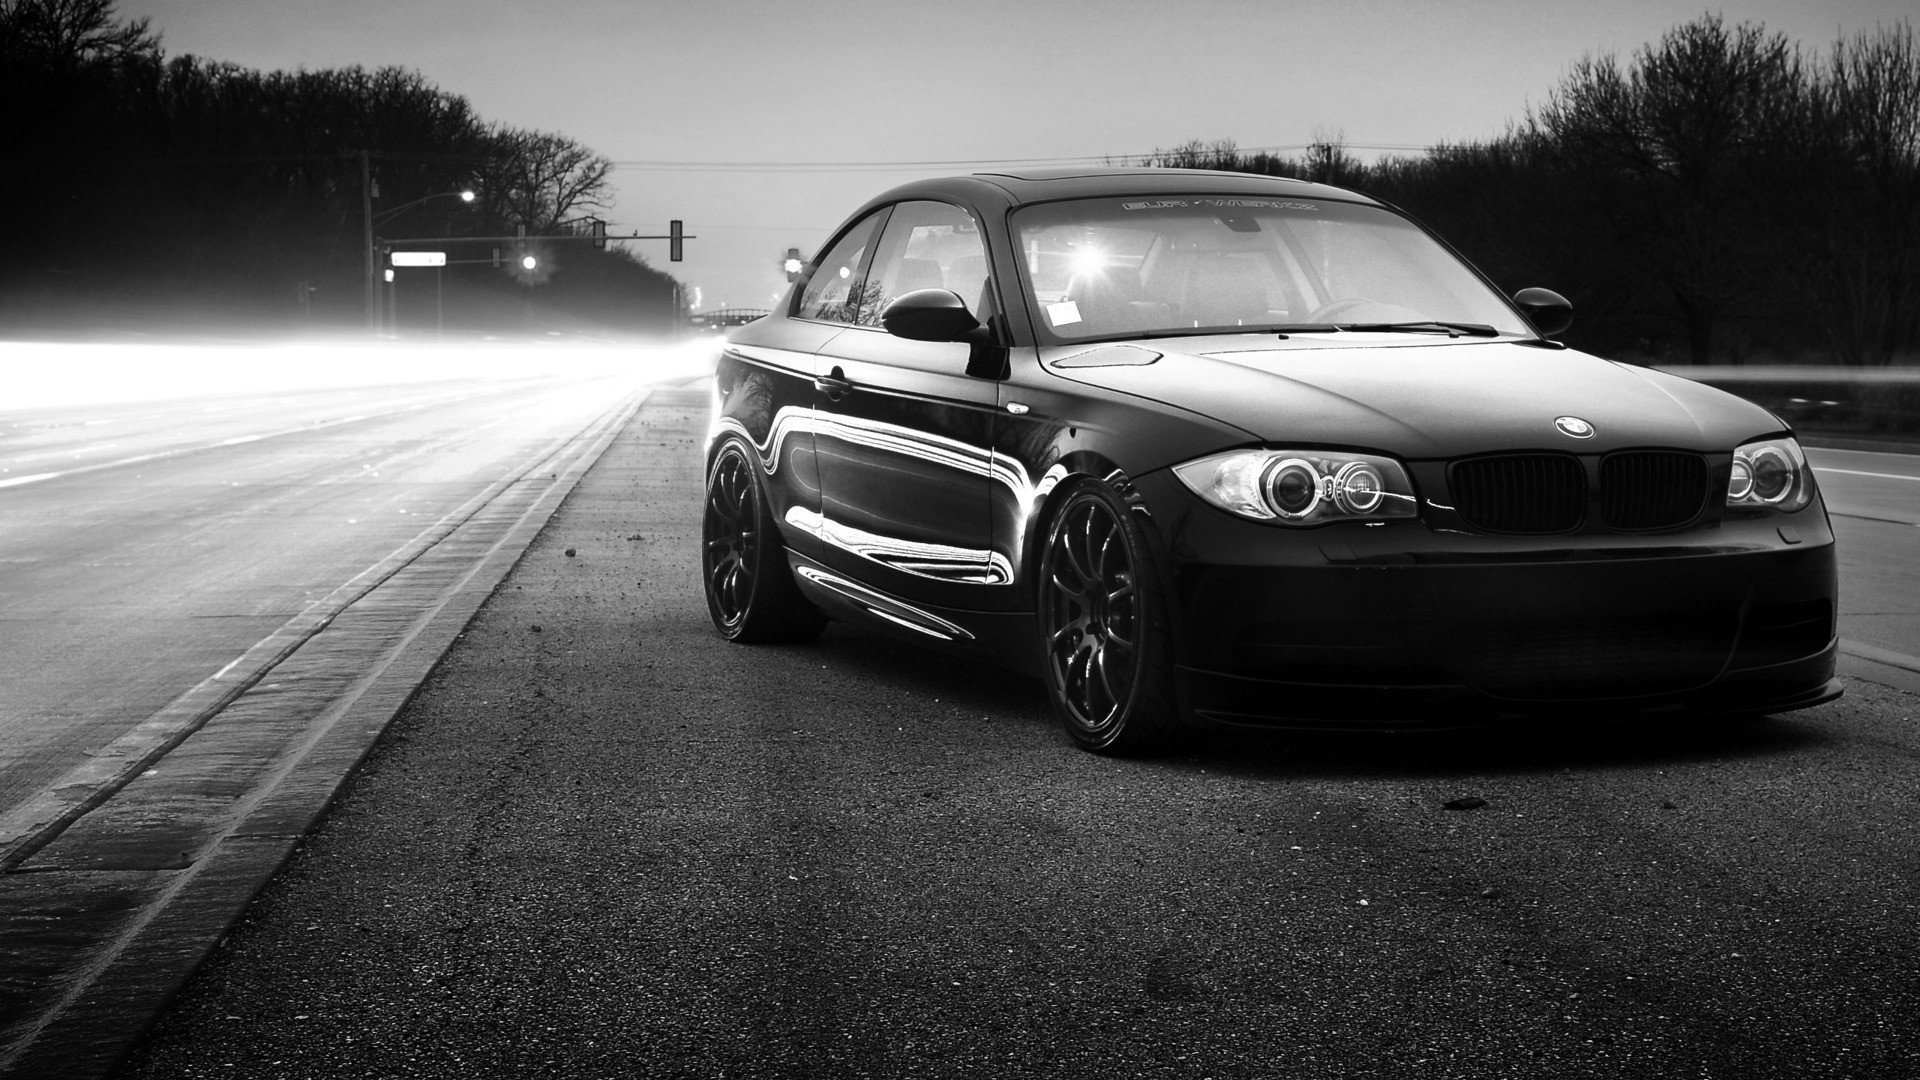 bmw, Cars, Grayscale, Roads, Tuning Wallpaper